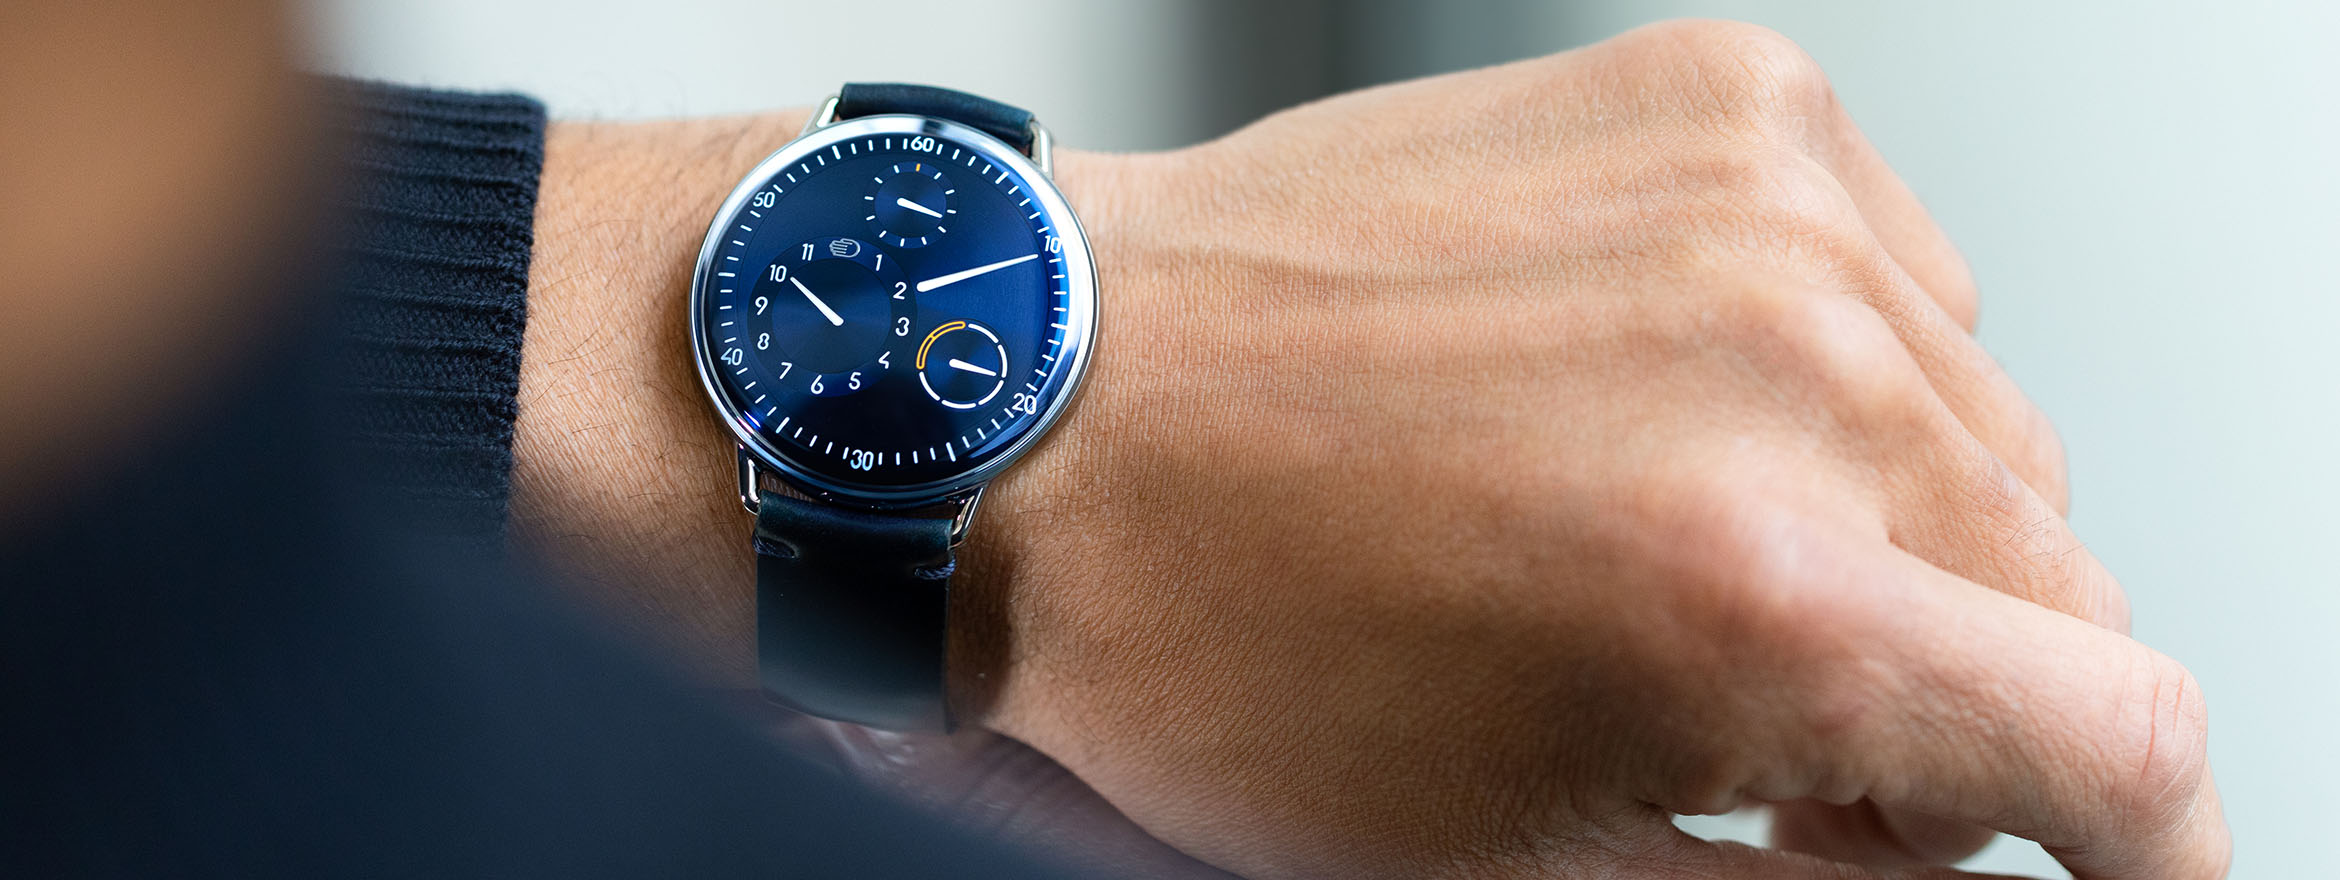 Ressence Reinvents Its Own Wheel in the New TYPE 1° Round